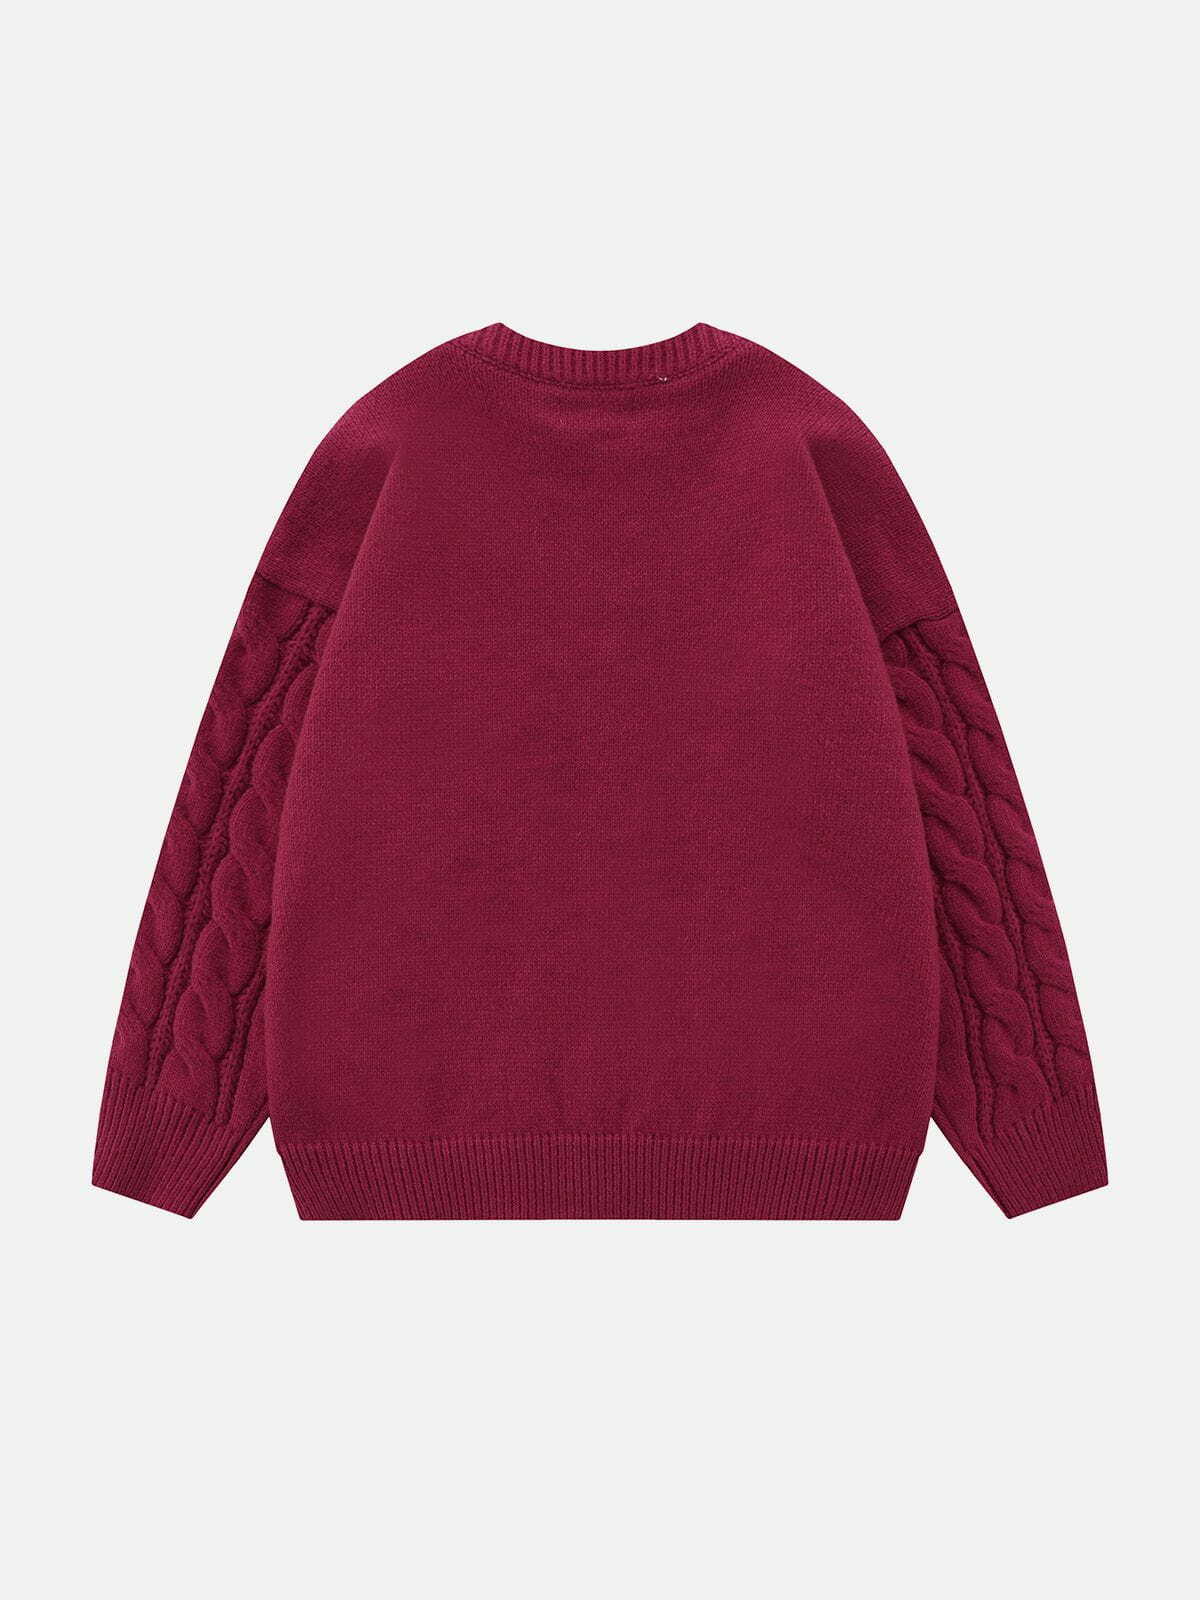 solid color knit sweater edgy streetwear statement 1570